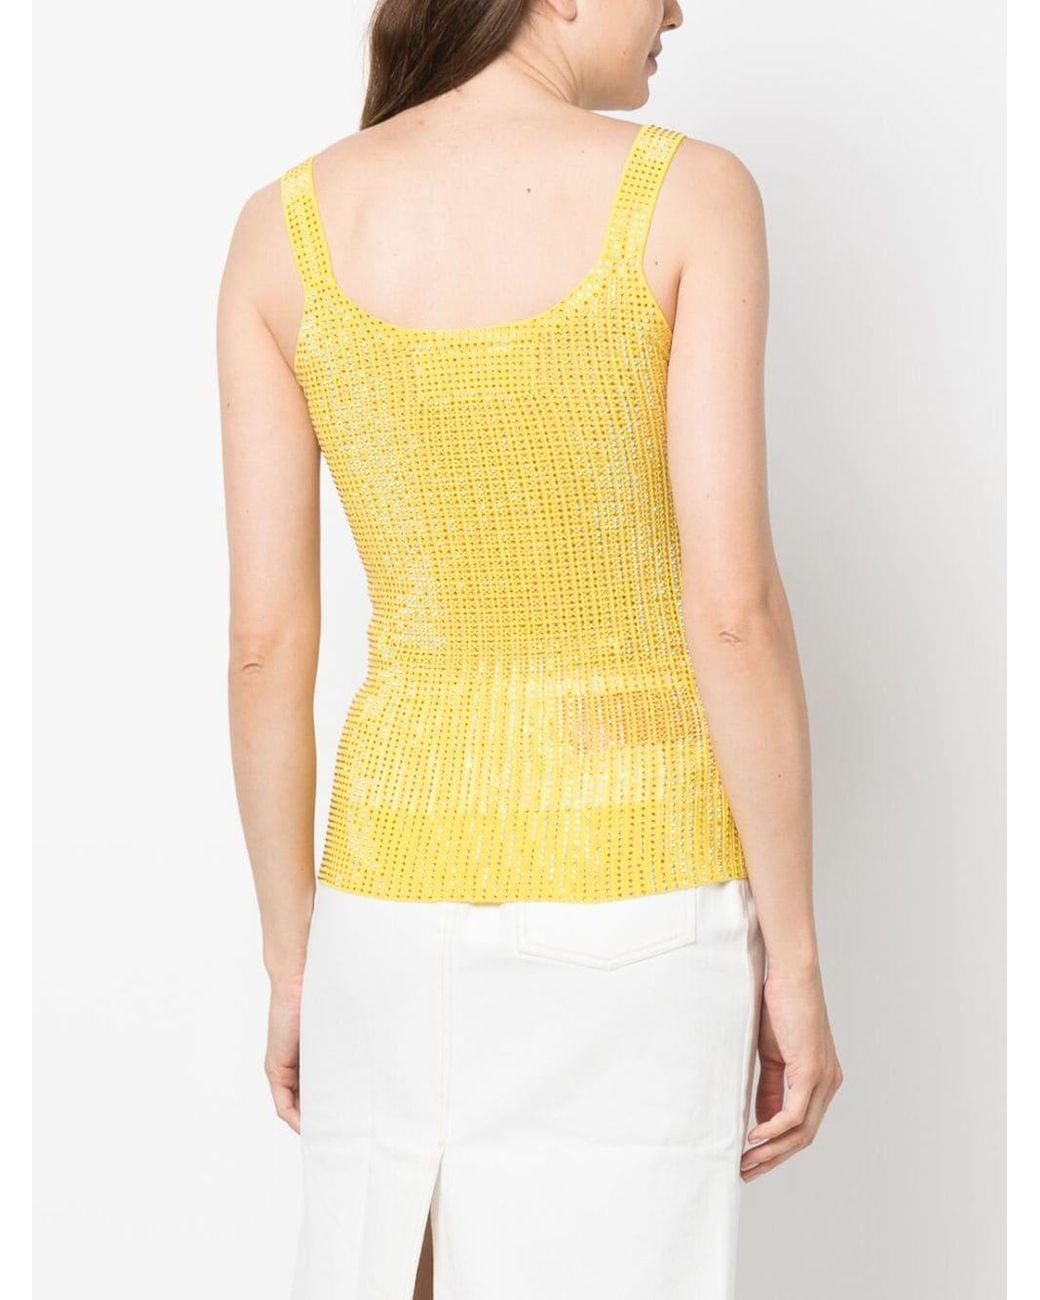 Ermanno Scervino Crystal-embellished Sleeveless Top in Yellow | Lyst UK